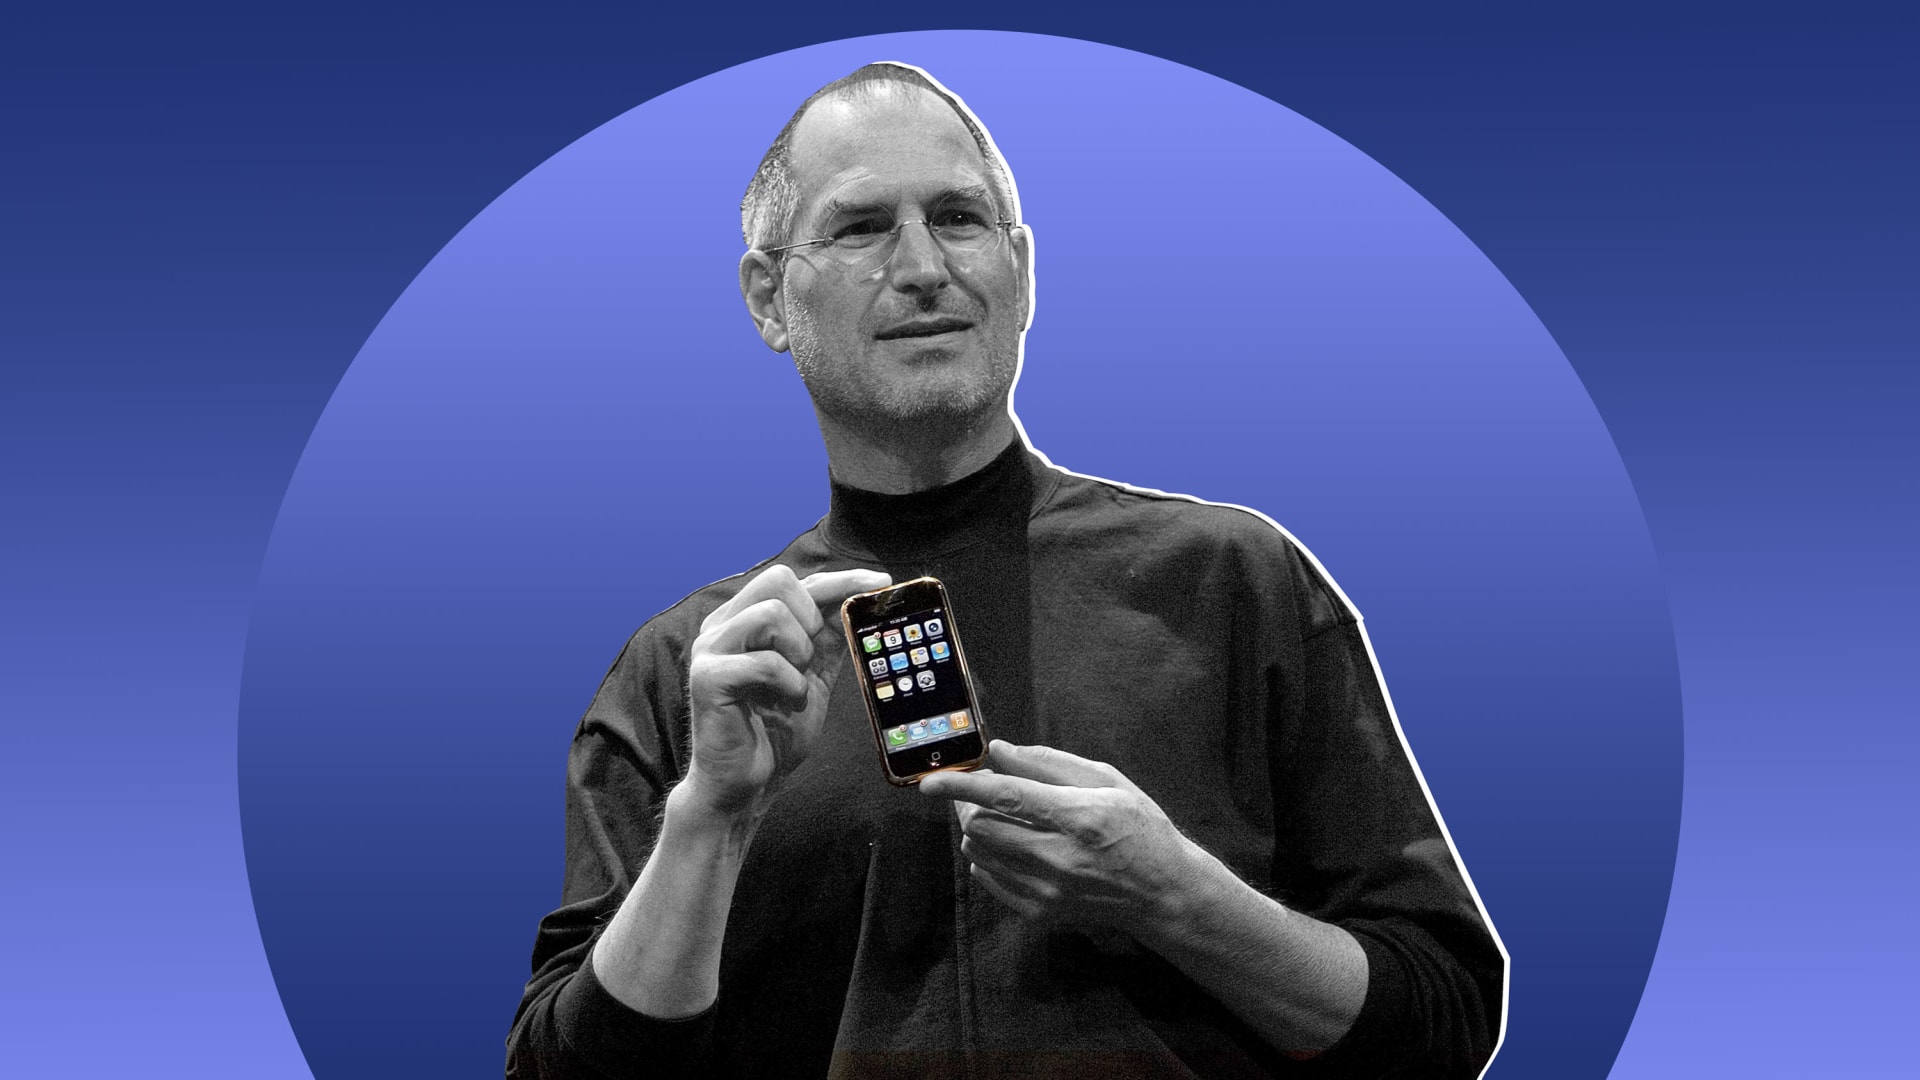 Steve Jobs holds up the first iPhone when it was introduced at Macworld in 2007.